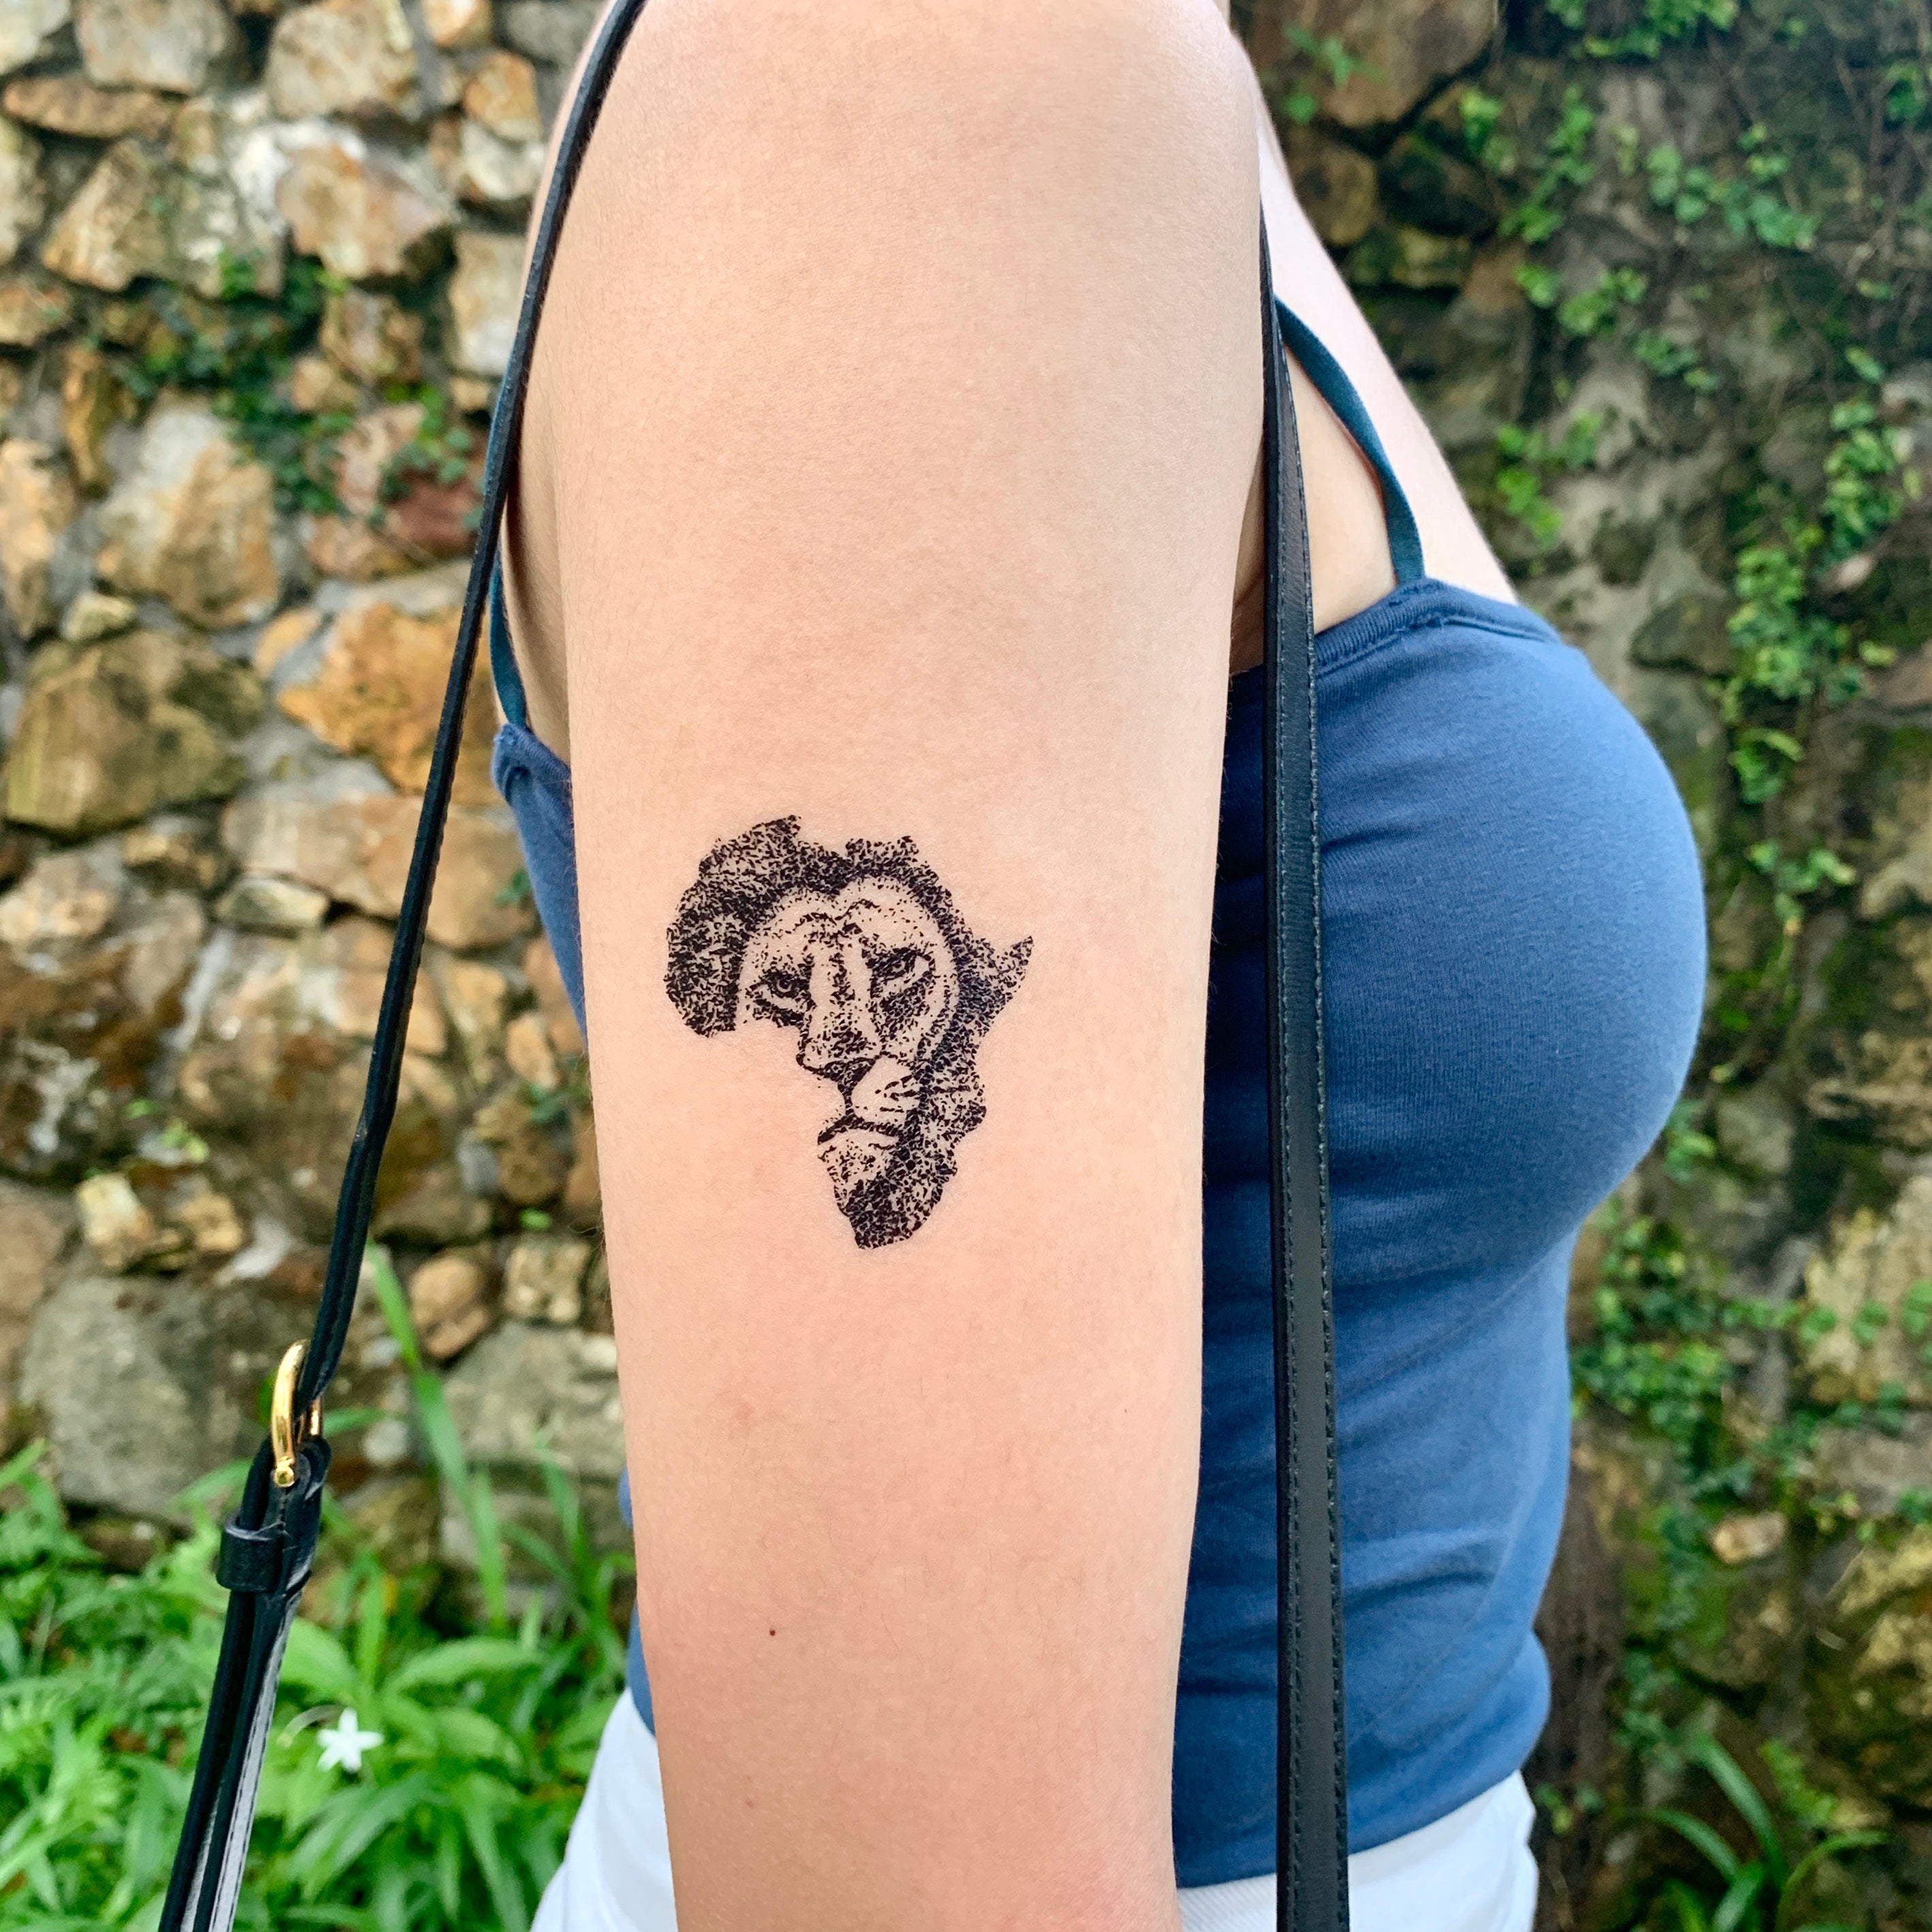 African Map Lion Black Culture Temporary Tattoo Sticker - OhMyTat